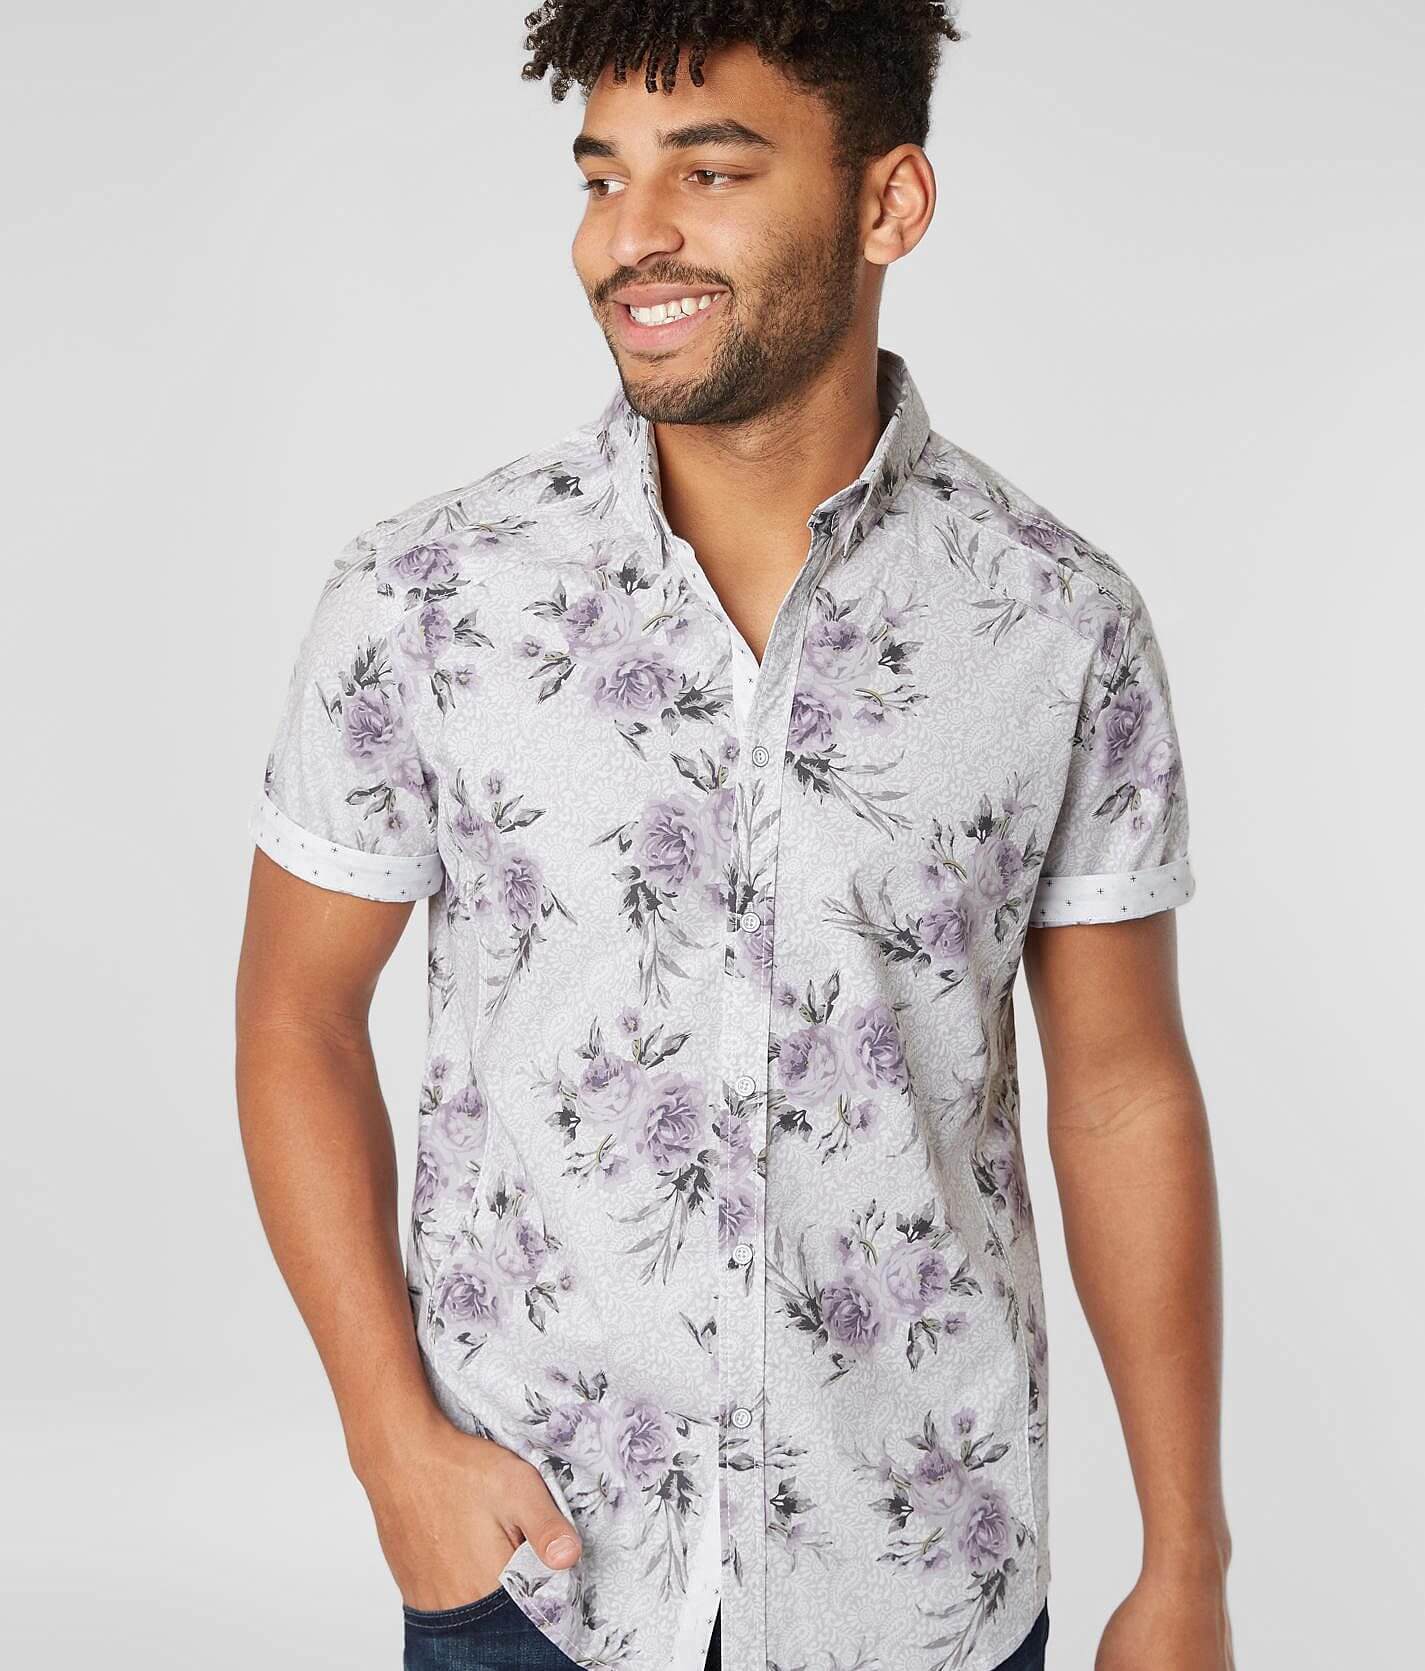 Mens Flower SHIRT - Psychedelic Floral Purple